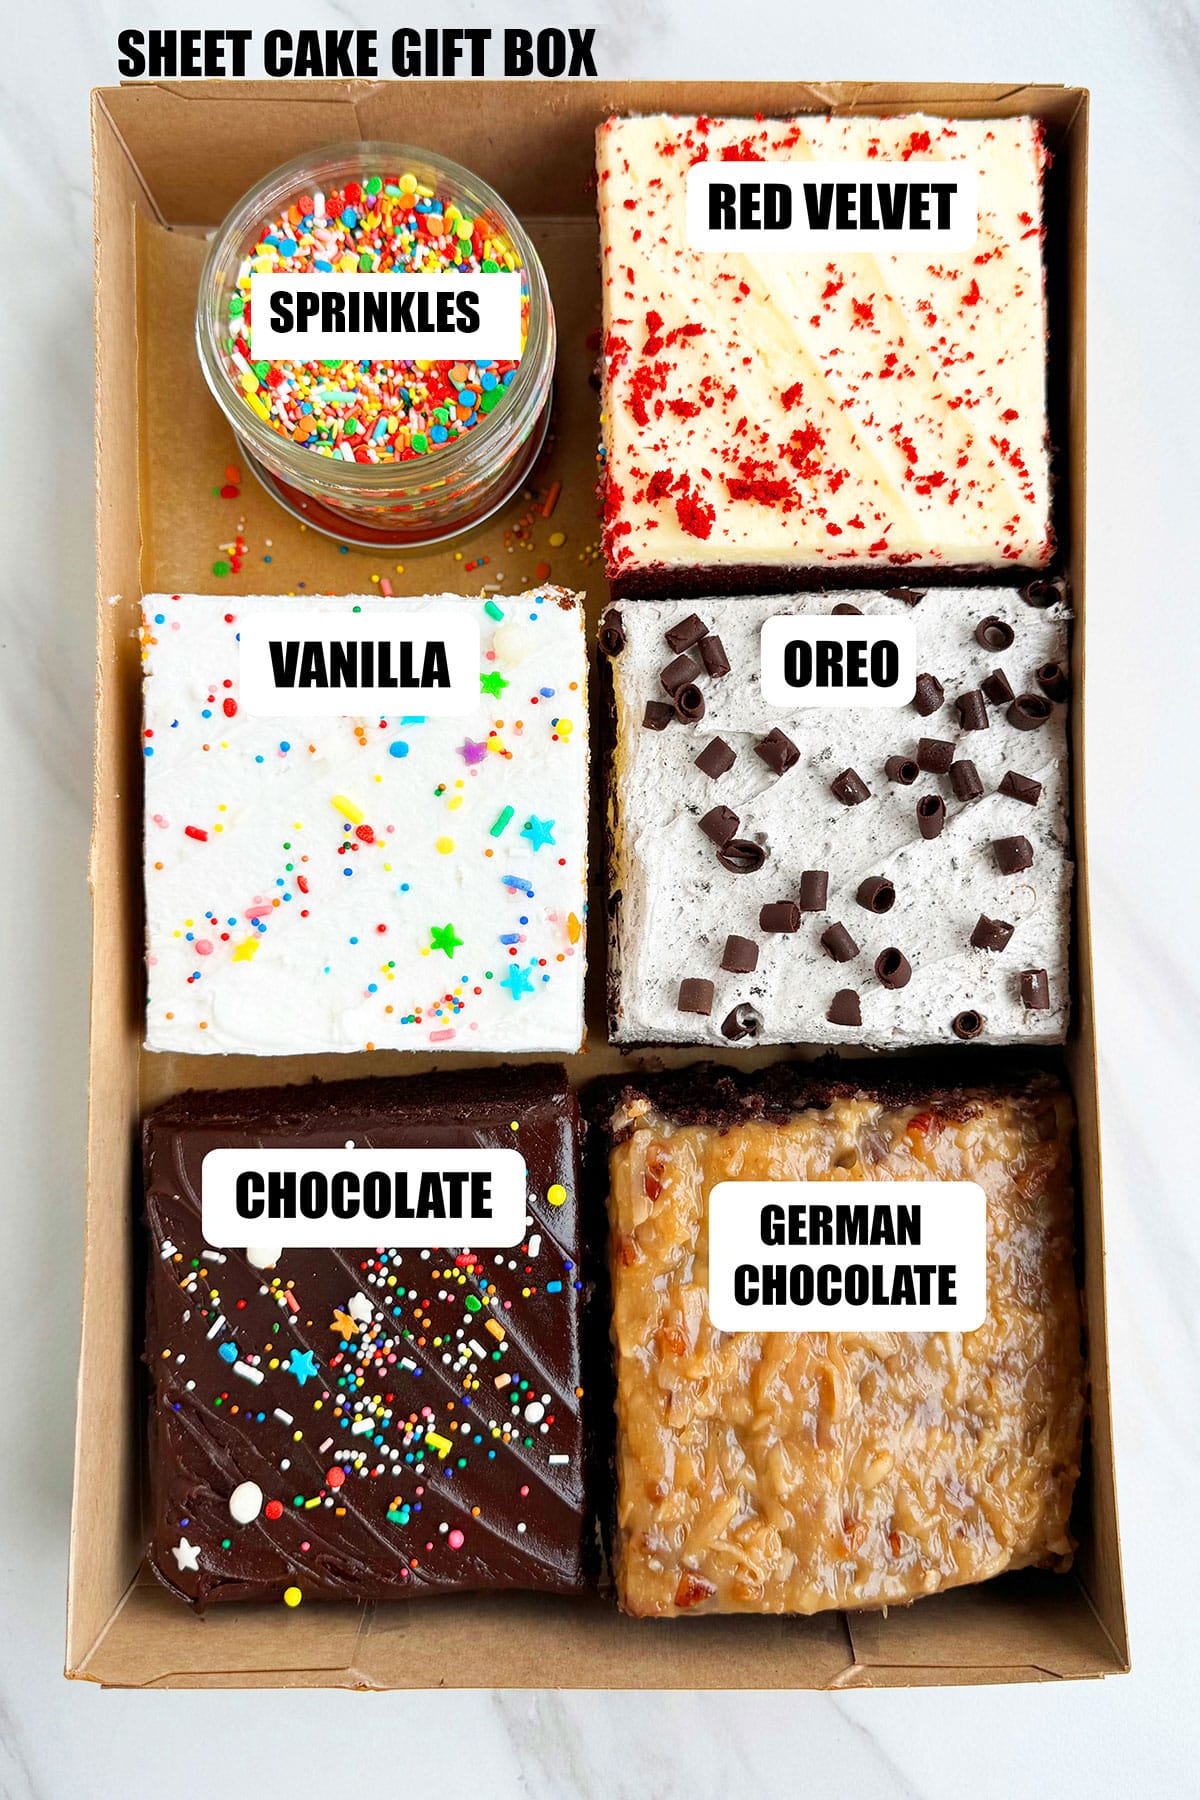 Homemade Sheet Cake Gift Box on White Marble Background- 5 Flavors. 